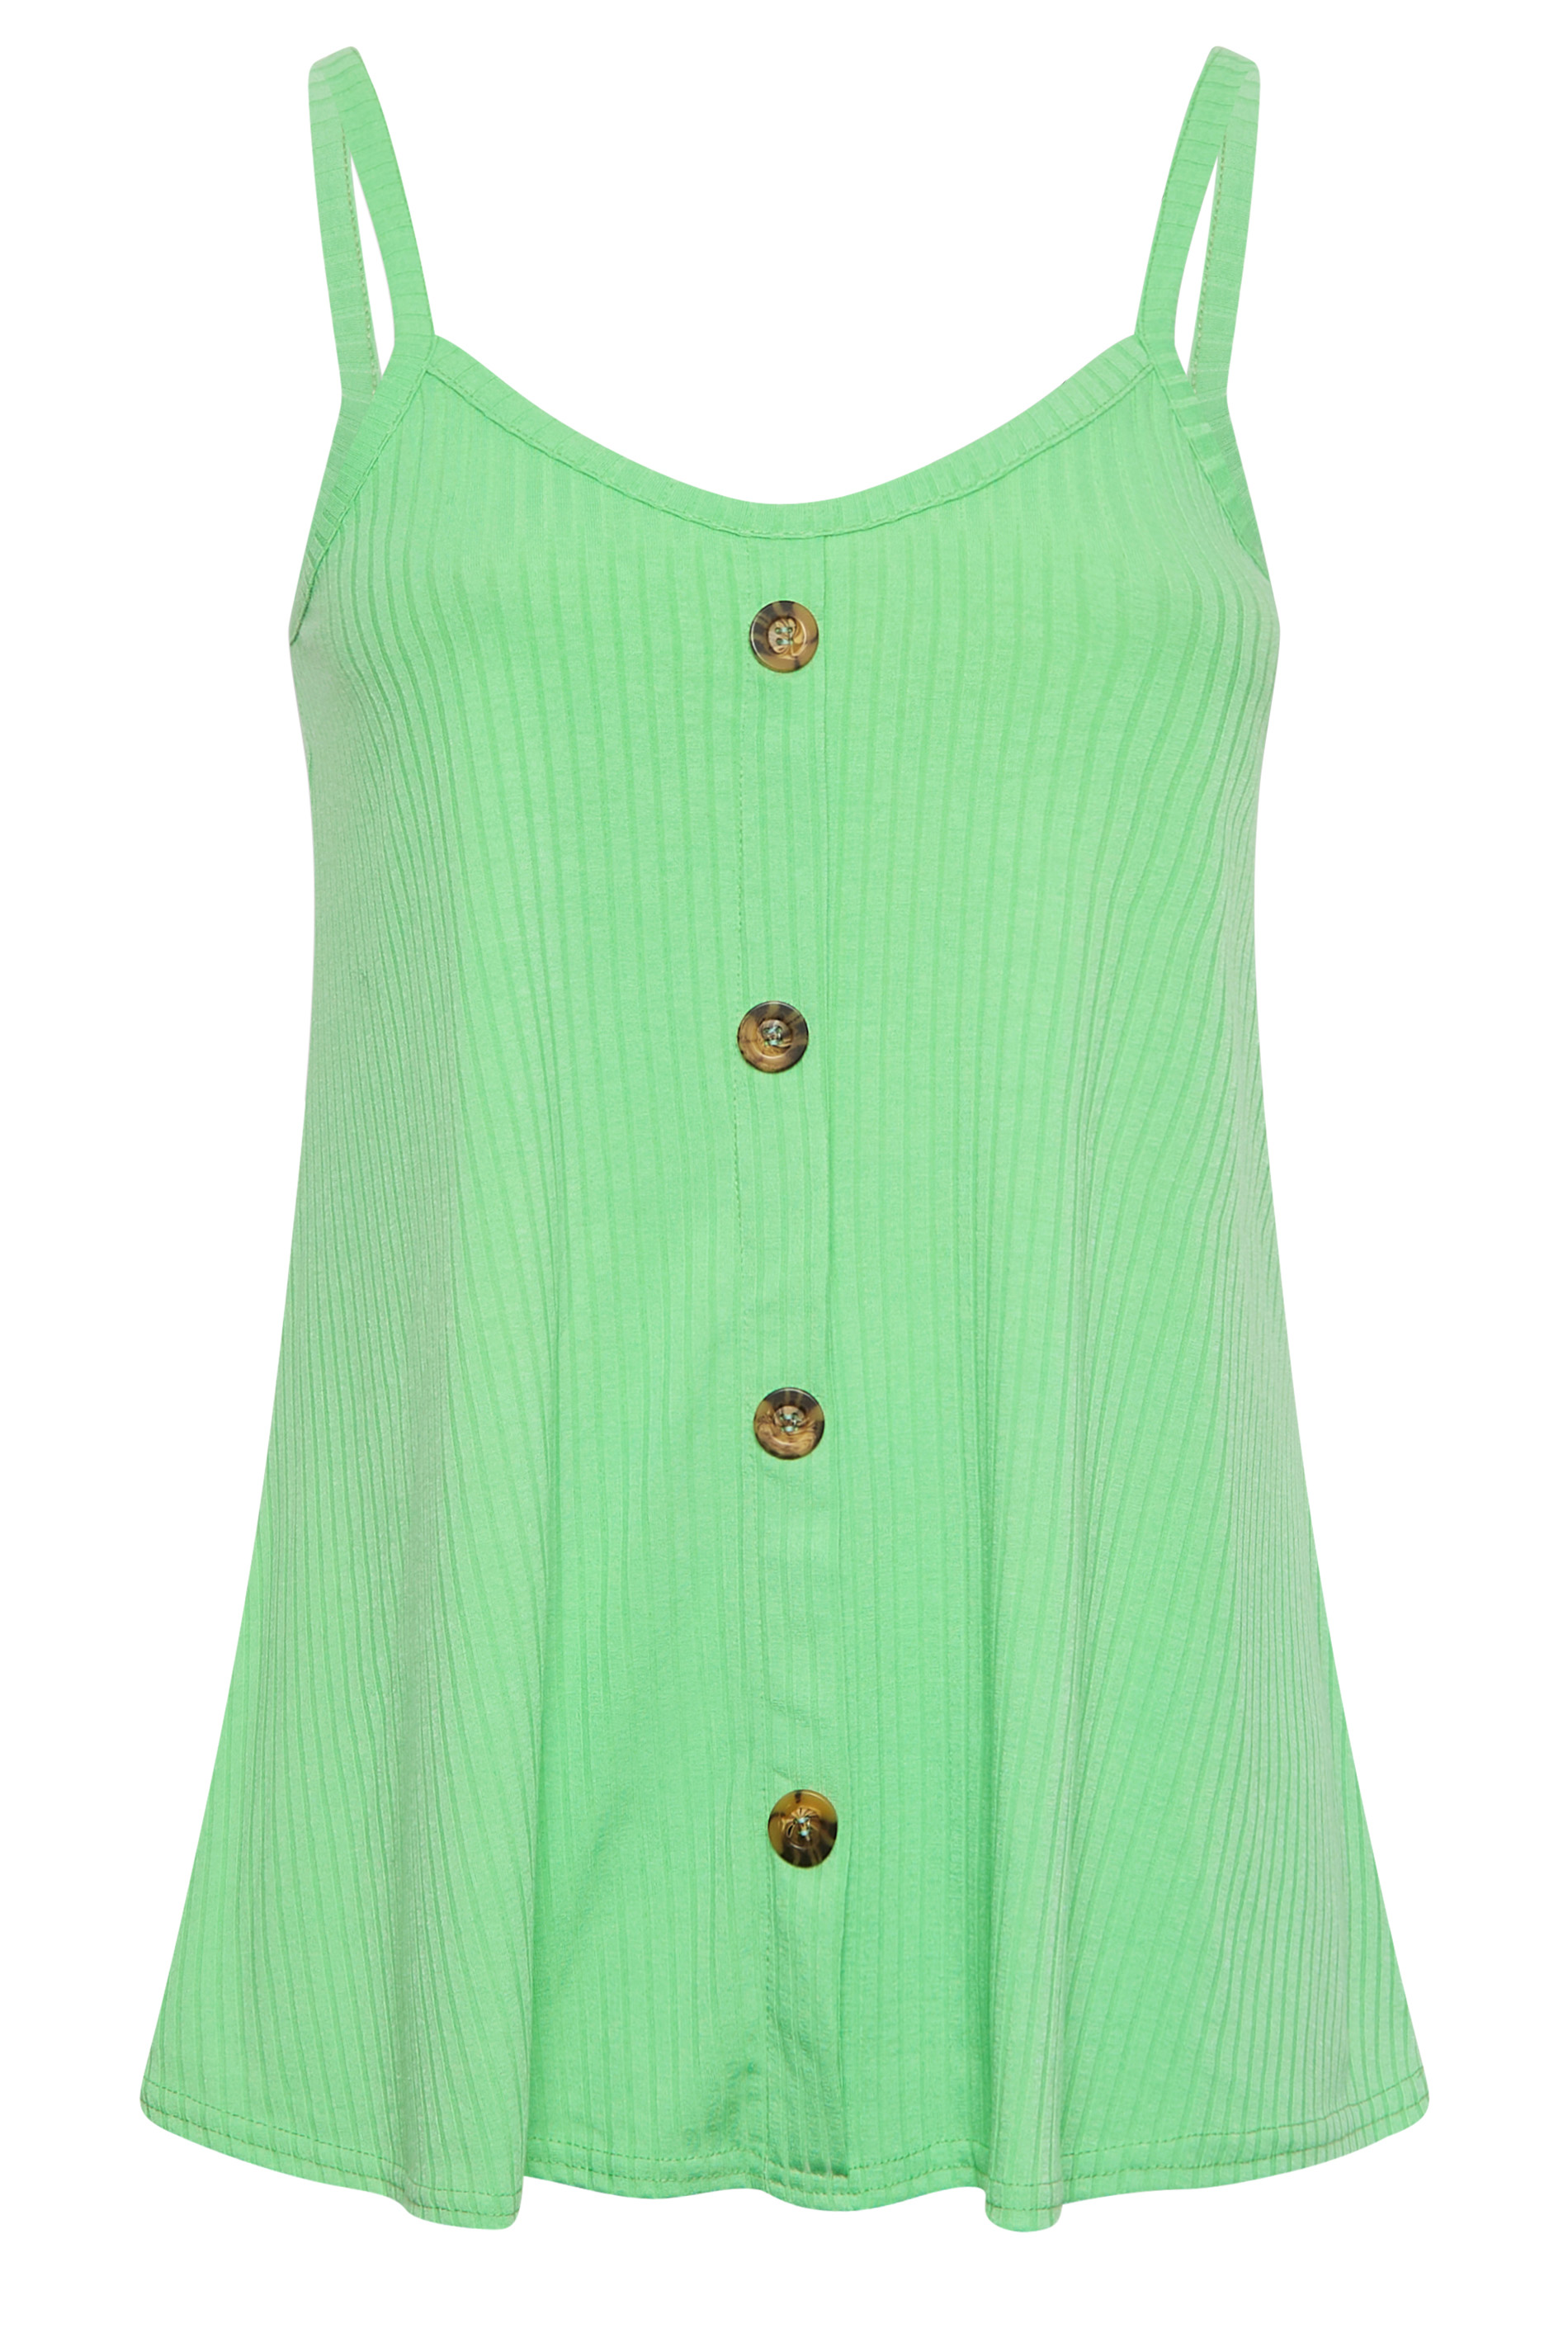 LIMITED COLLECTION Plus Size Green Ribbed Button Cami Vest Top